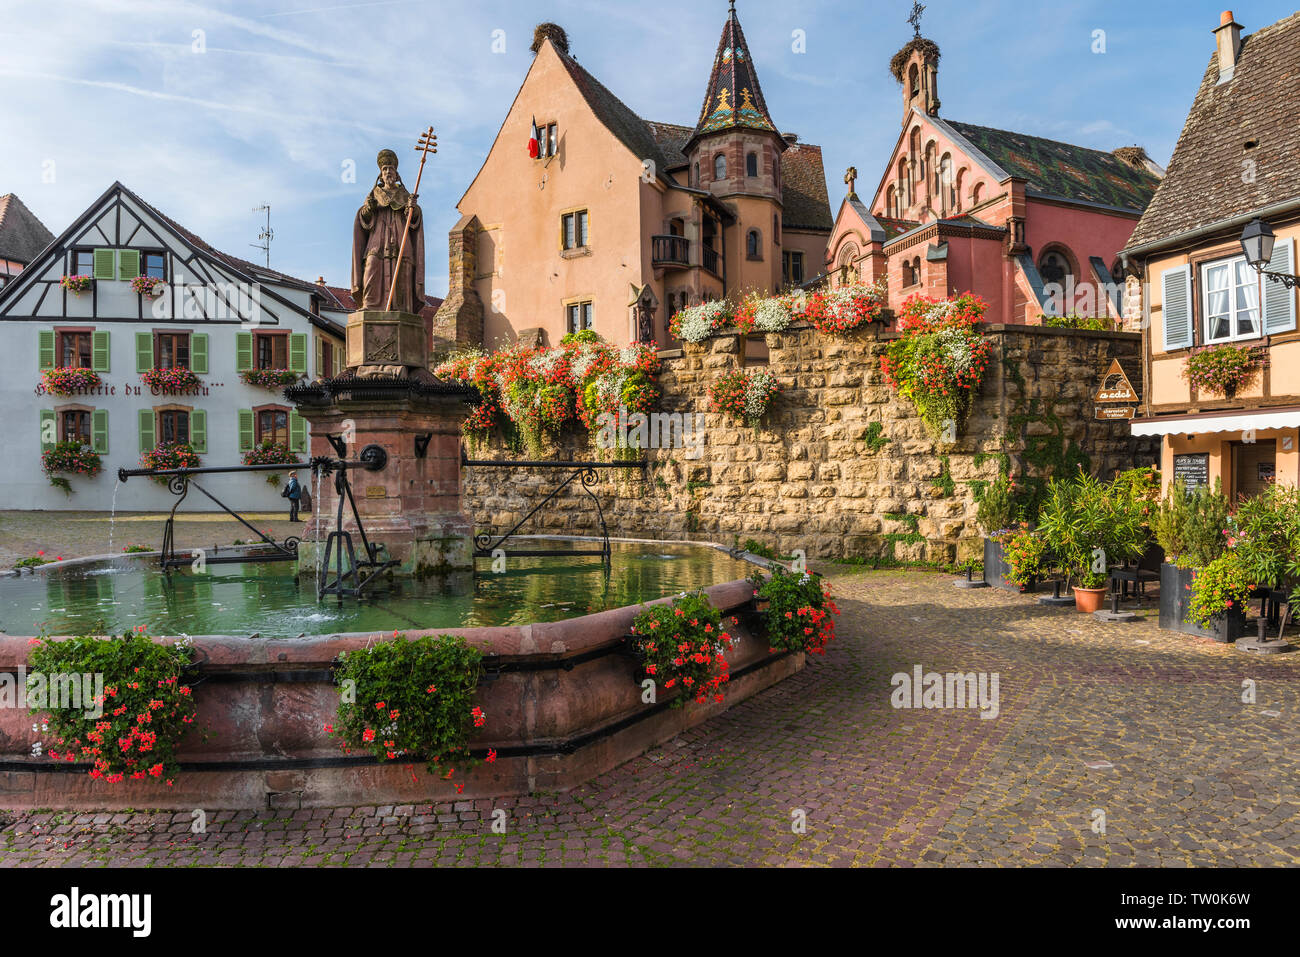 picturesque place in the old village Eguisheim, Alsace, France, scenic square with castle Château de Saint-Léon-Pfalz and well Stock Photo